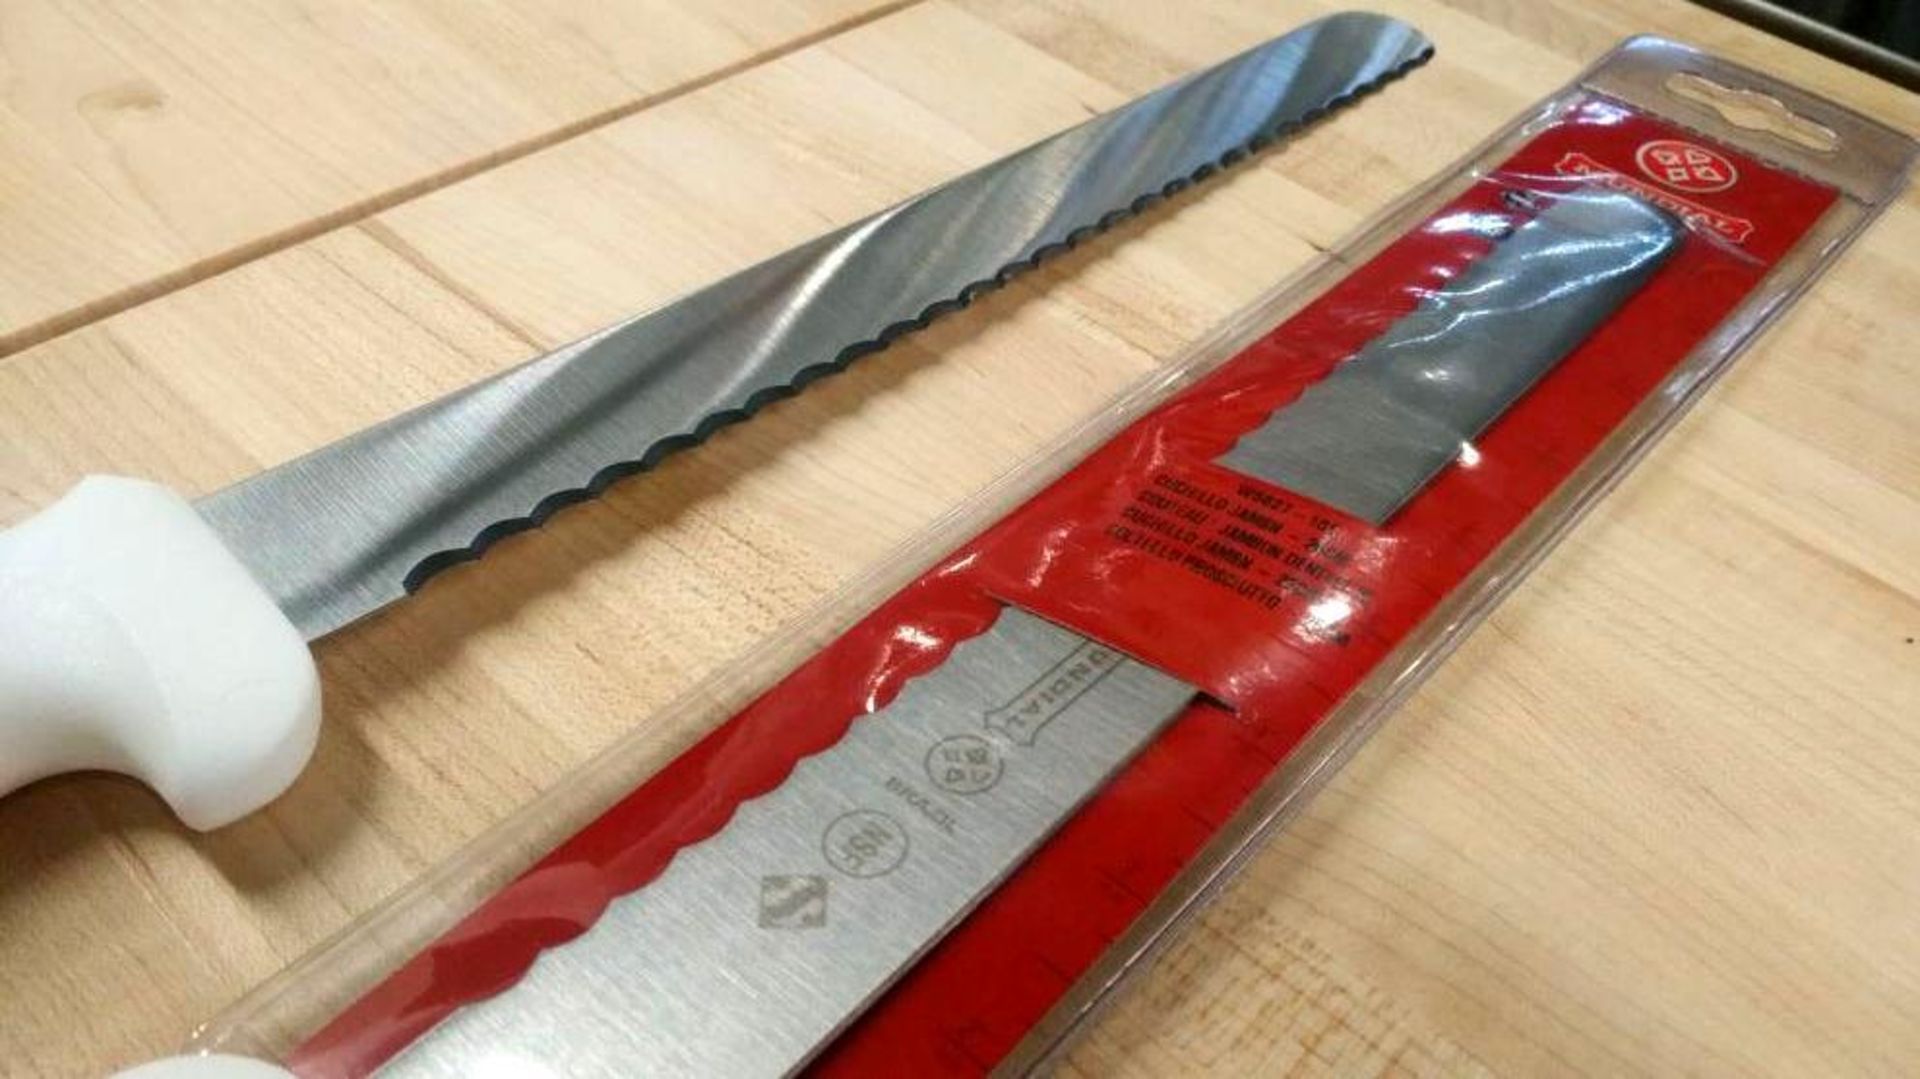 MUNDIAL 10" SLICING KNIVES, W5627-10 - LOT OF 2 - NEW - Image 2 of 2